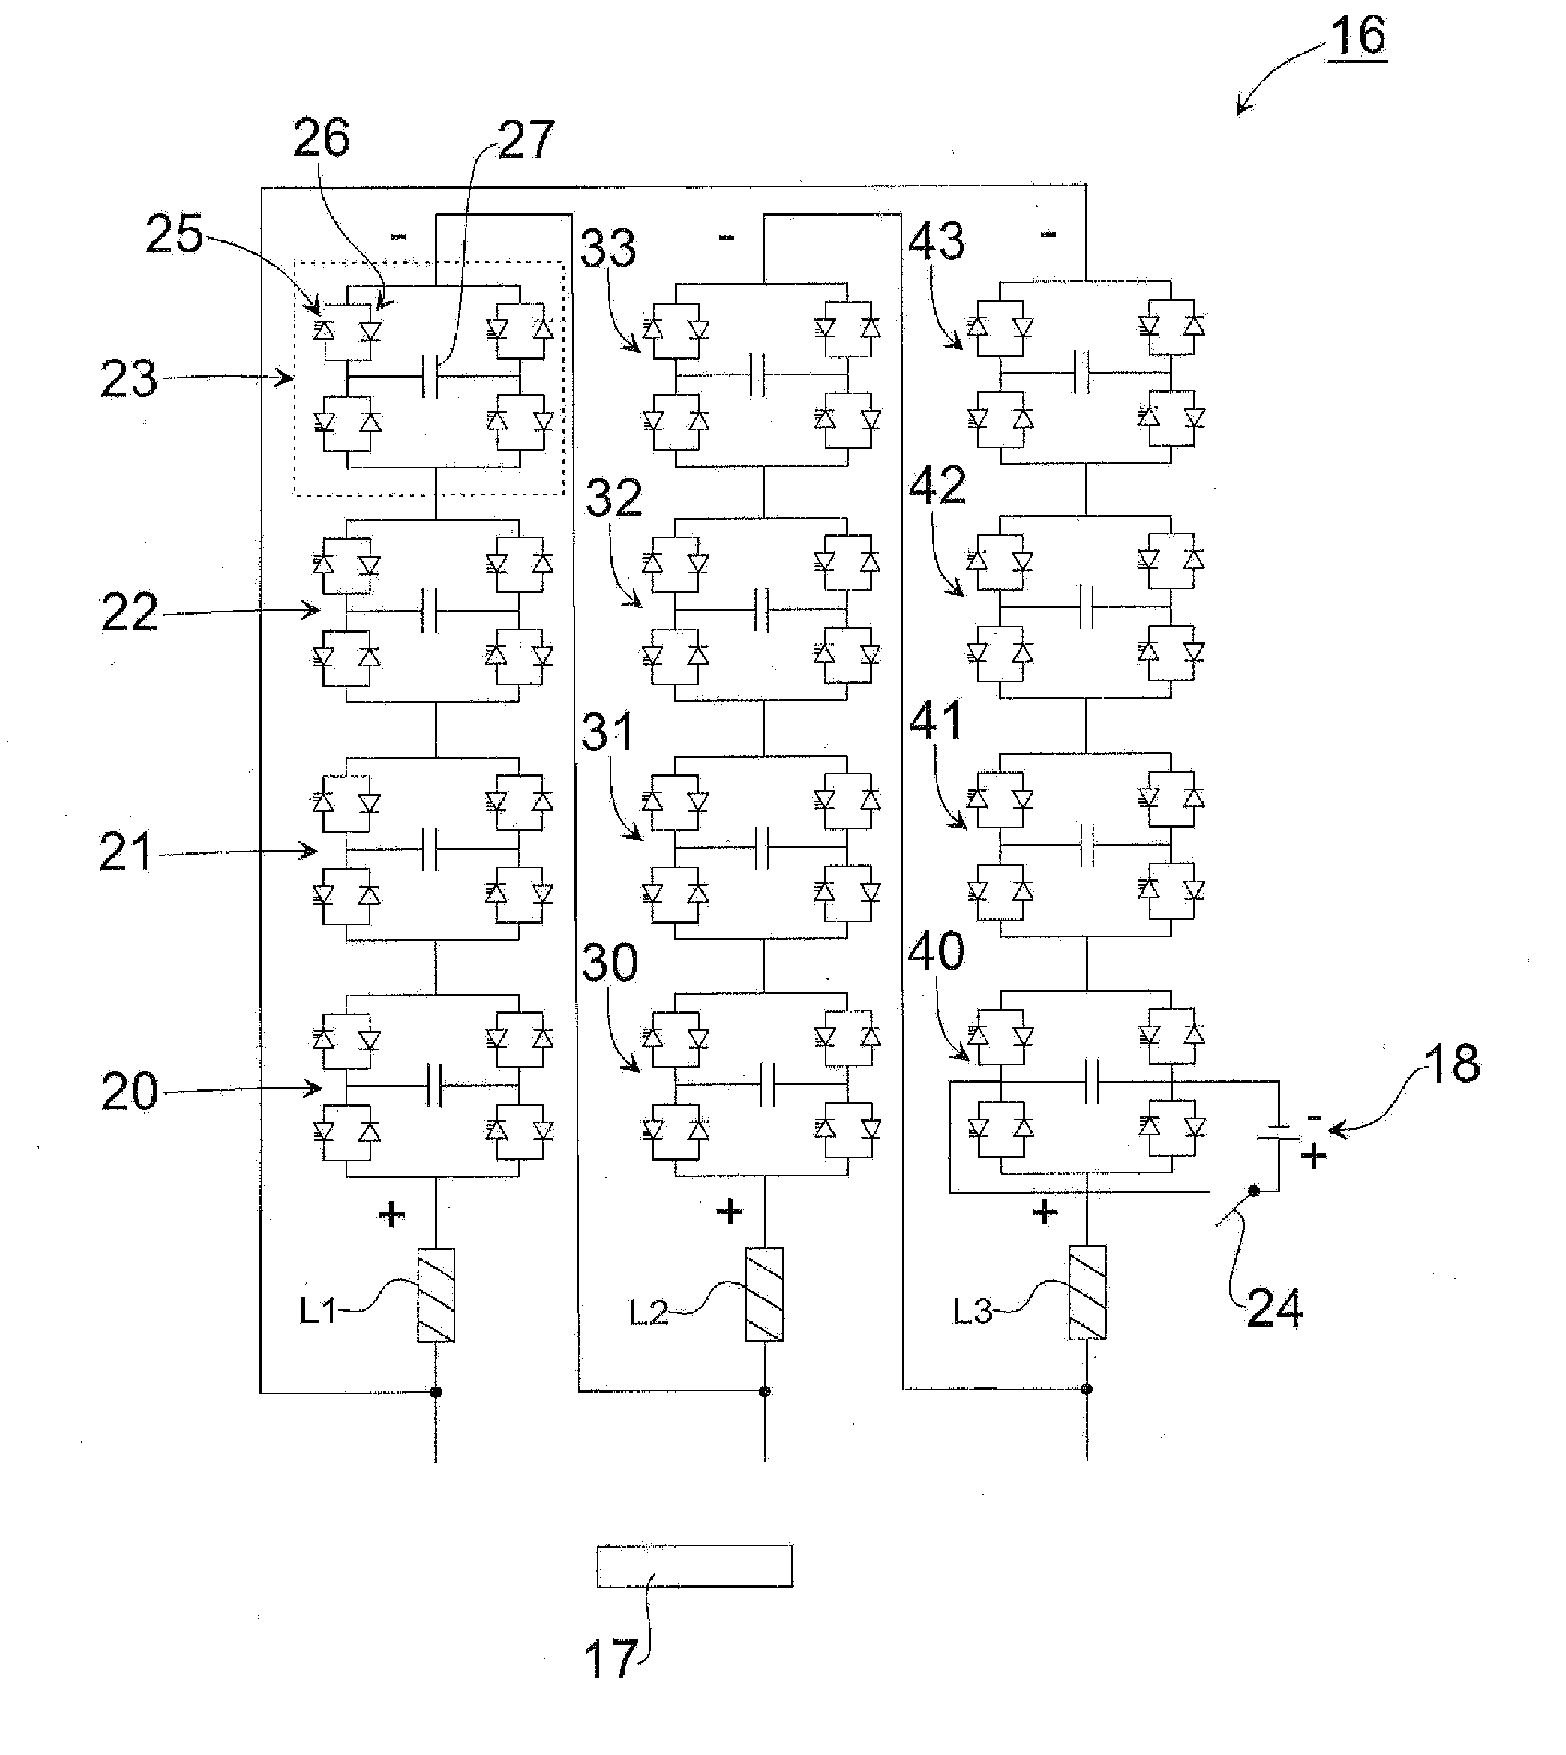 Chain-link converter, method for starting chain-link converter and static compensator system